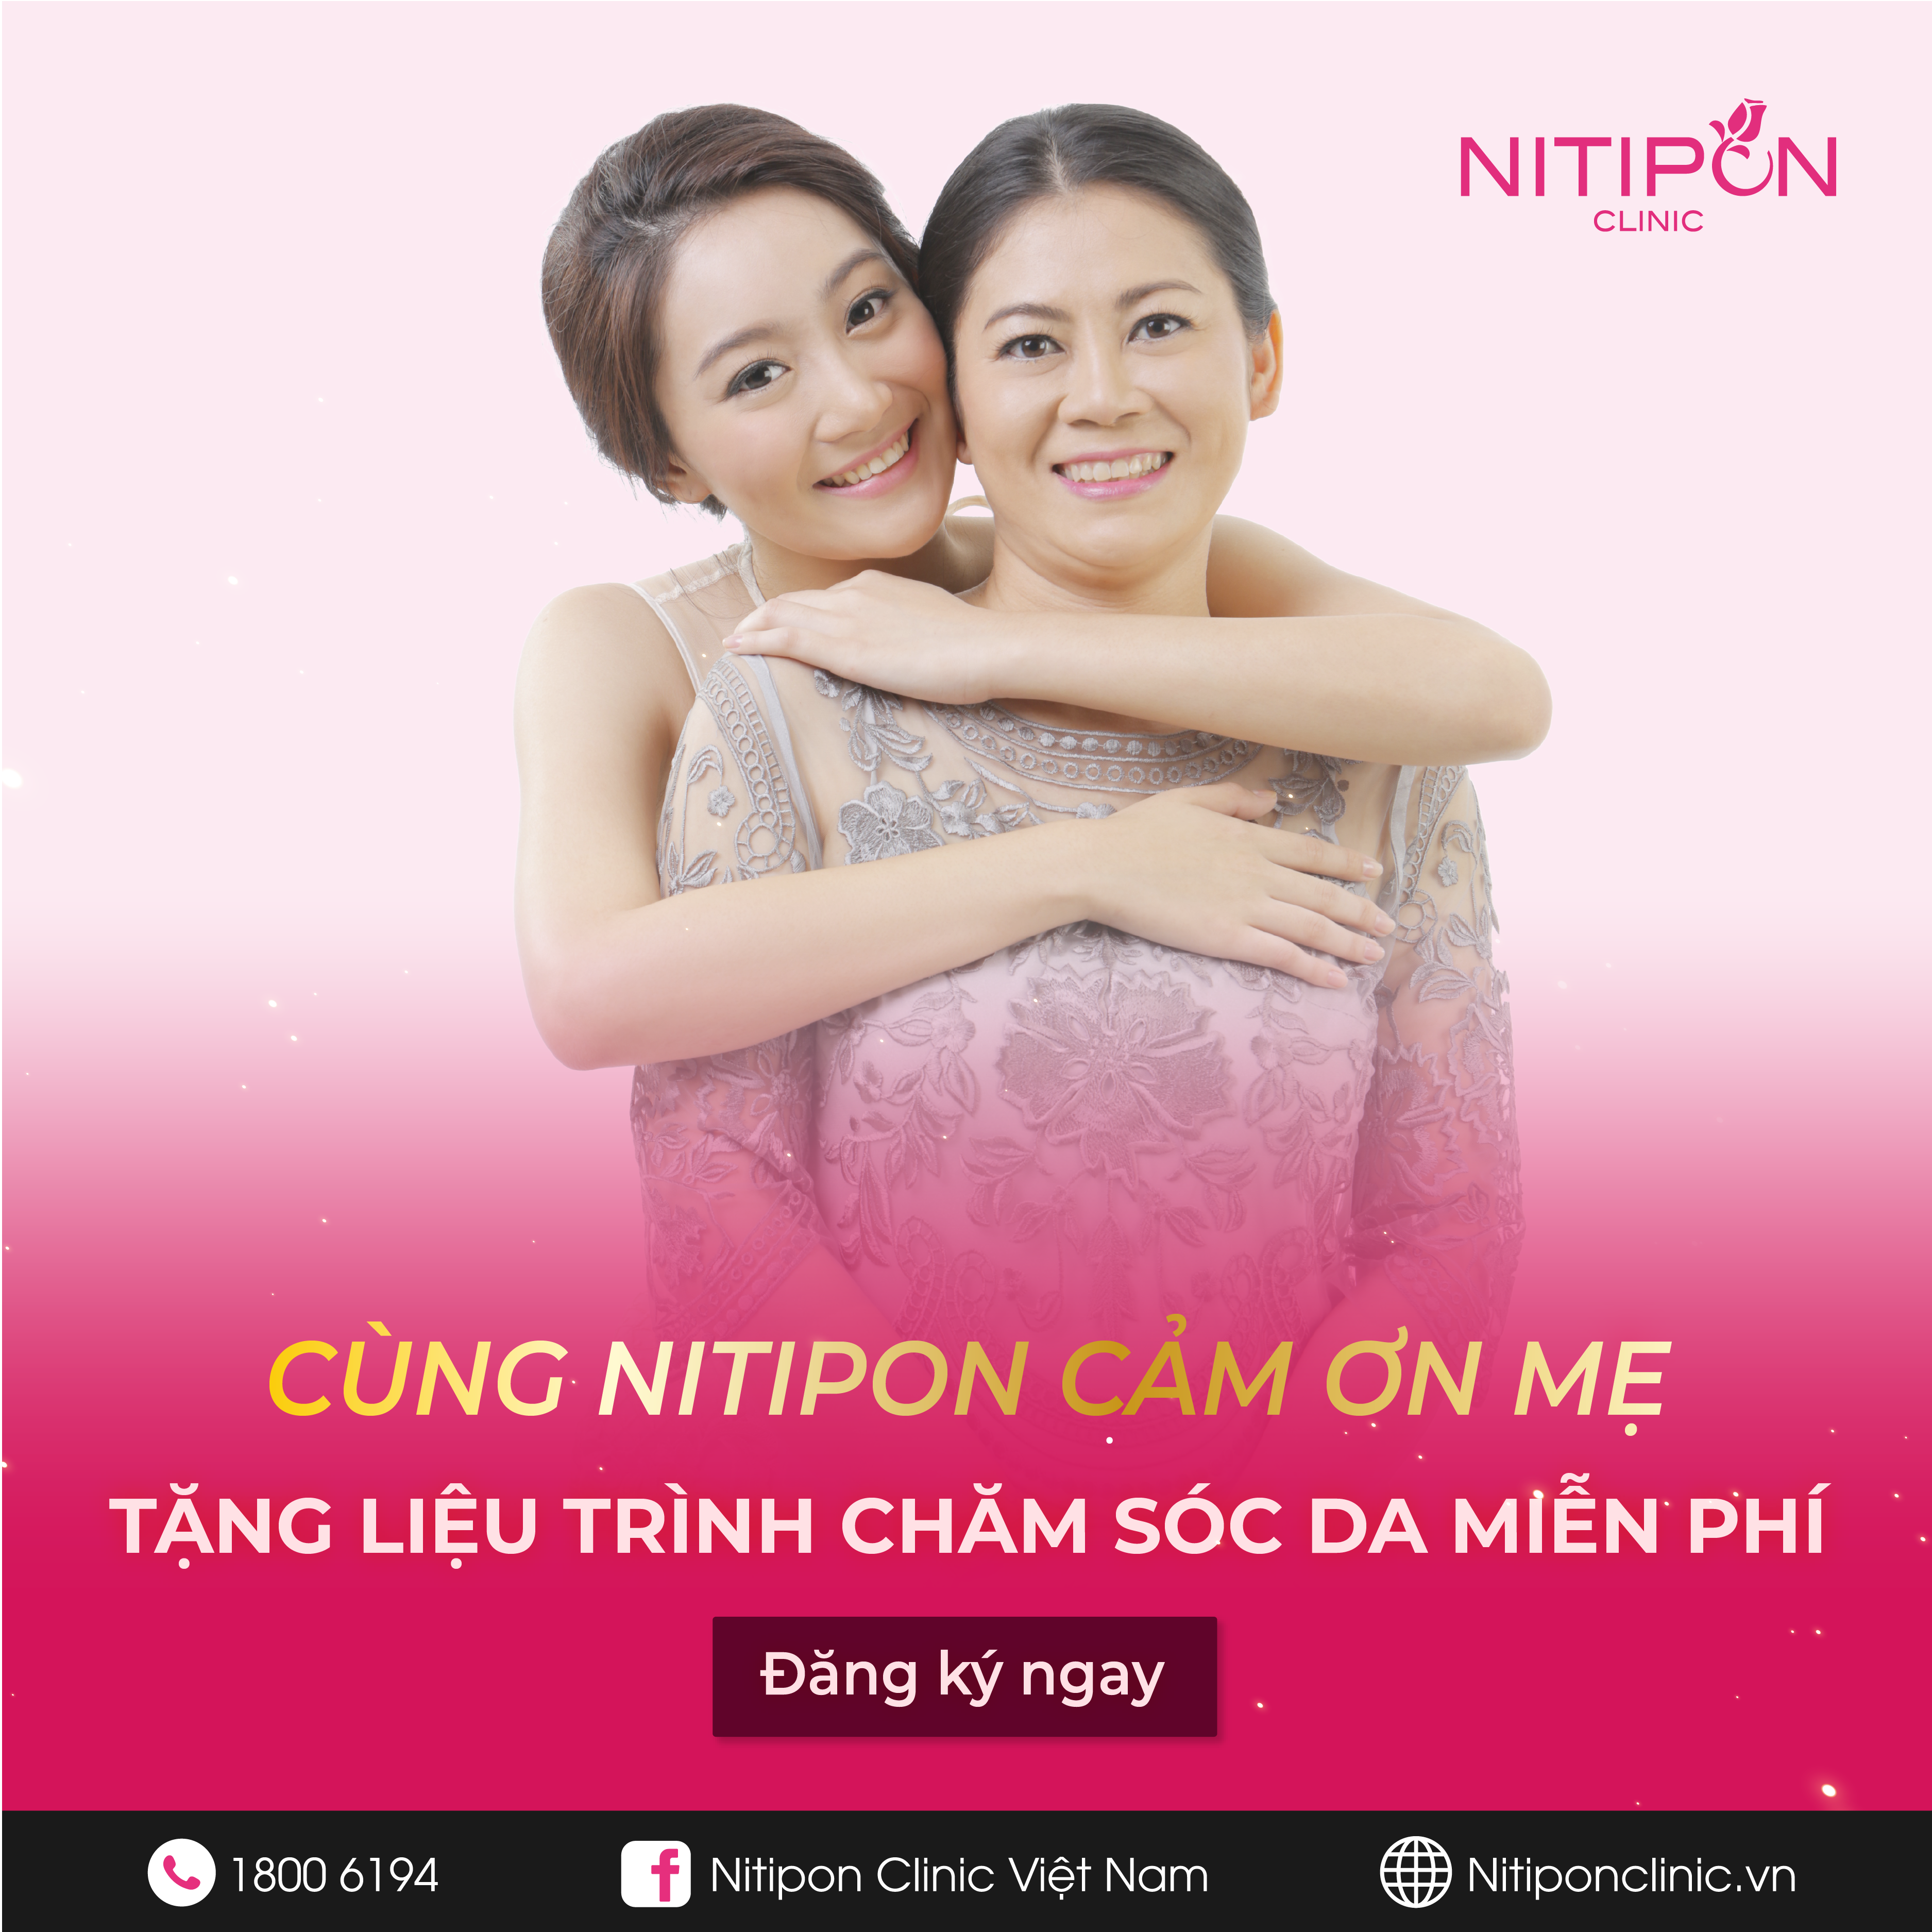 HAPPY MOTHER’S DAY WITH NITIPON